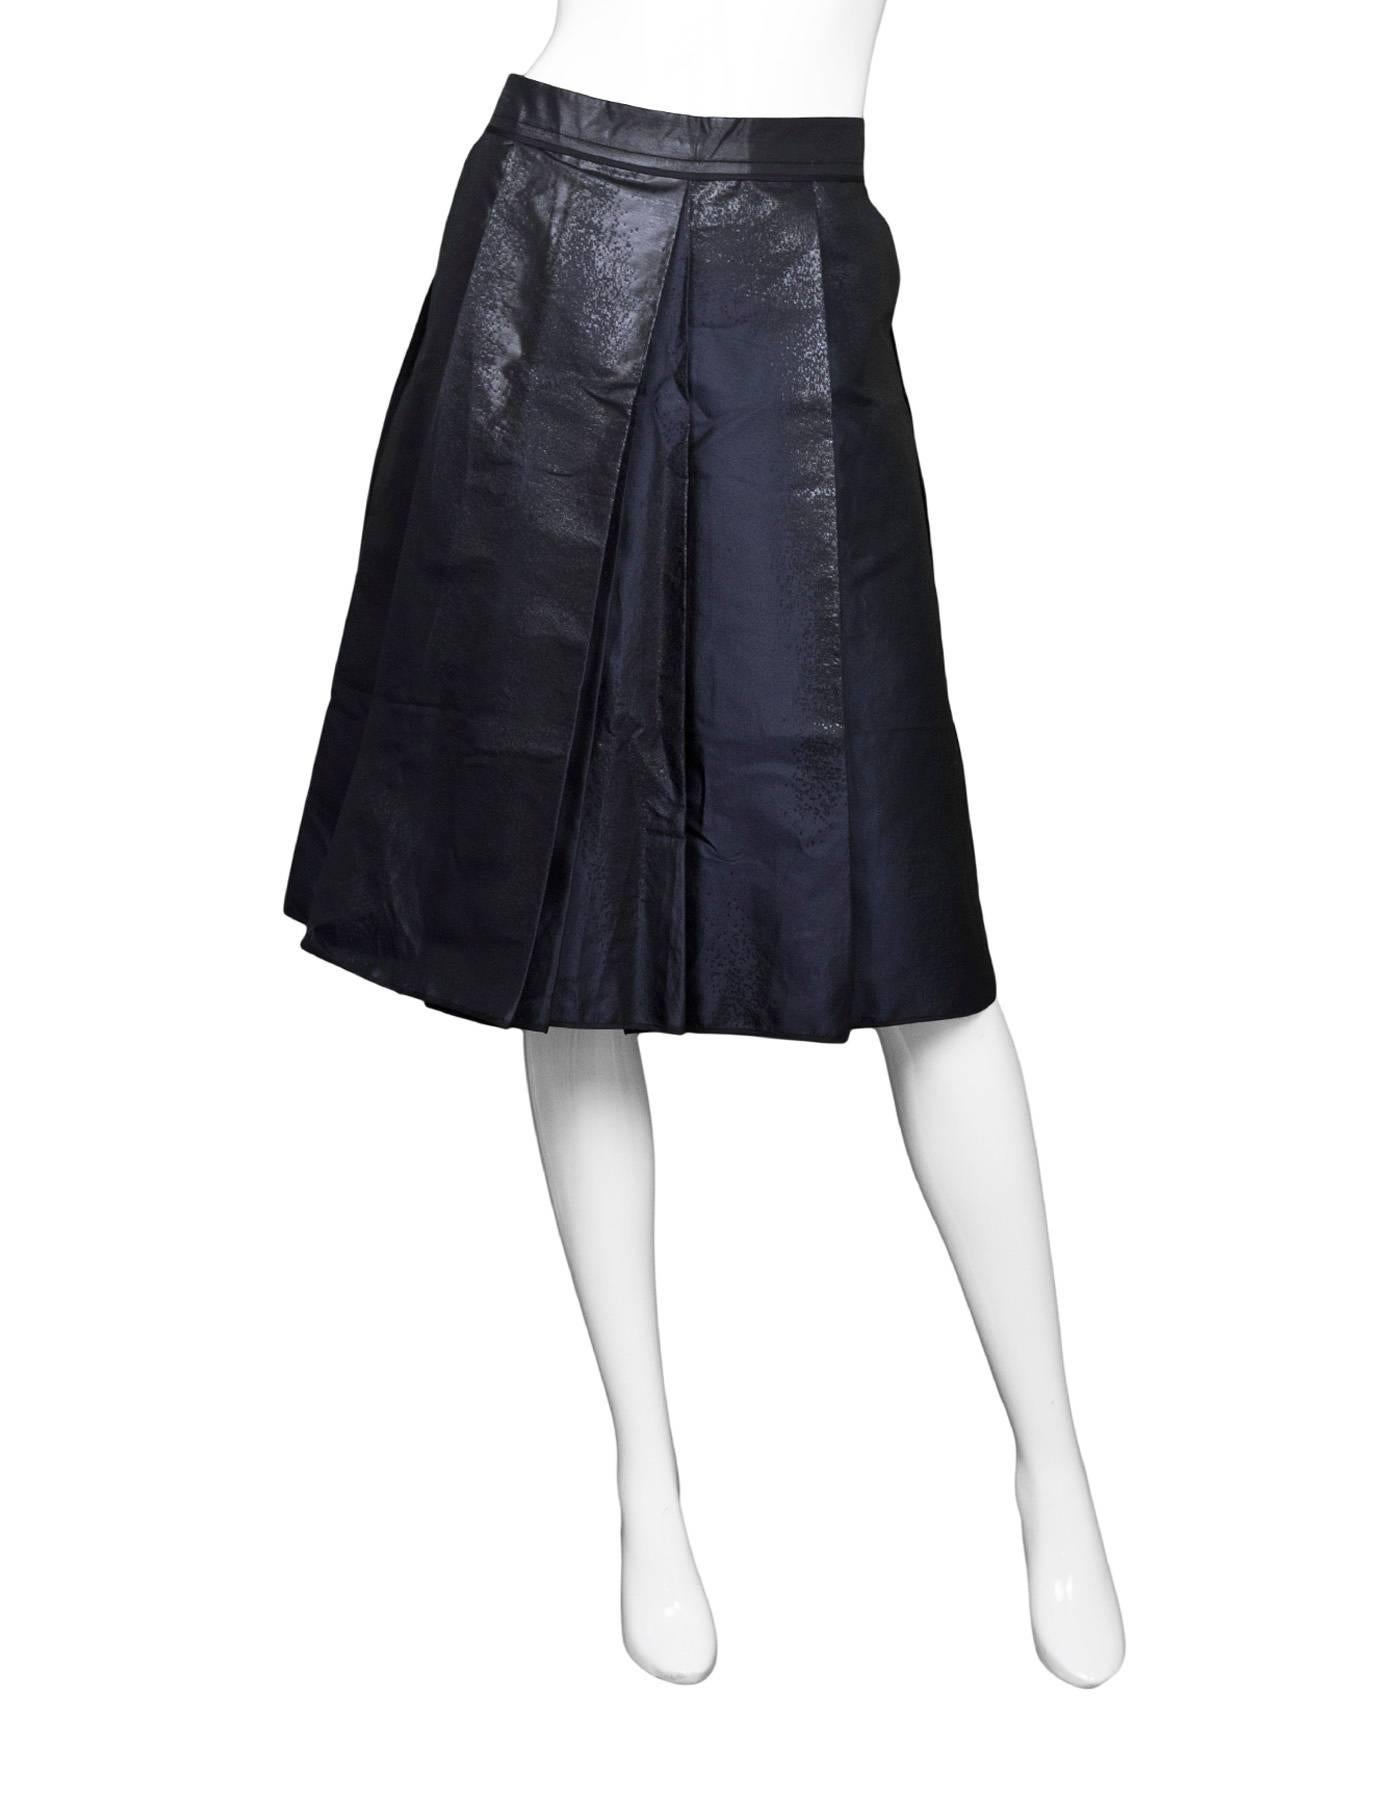 Vera Wang Navy Iridescent Pleated Skirt Sz 8

Made In: USA
Color: Navy/black
Composition: 78% Silk, 22% Polyester
Lining: Black silk
Closure/Opening: Hidden back zip closure
Retail Price: $ 1,035 + tax
Overall Condition: Excellent pre-owned